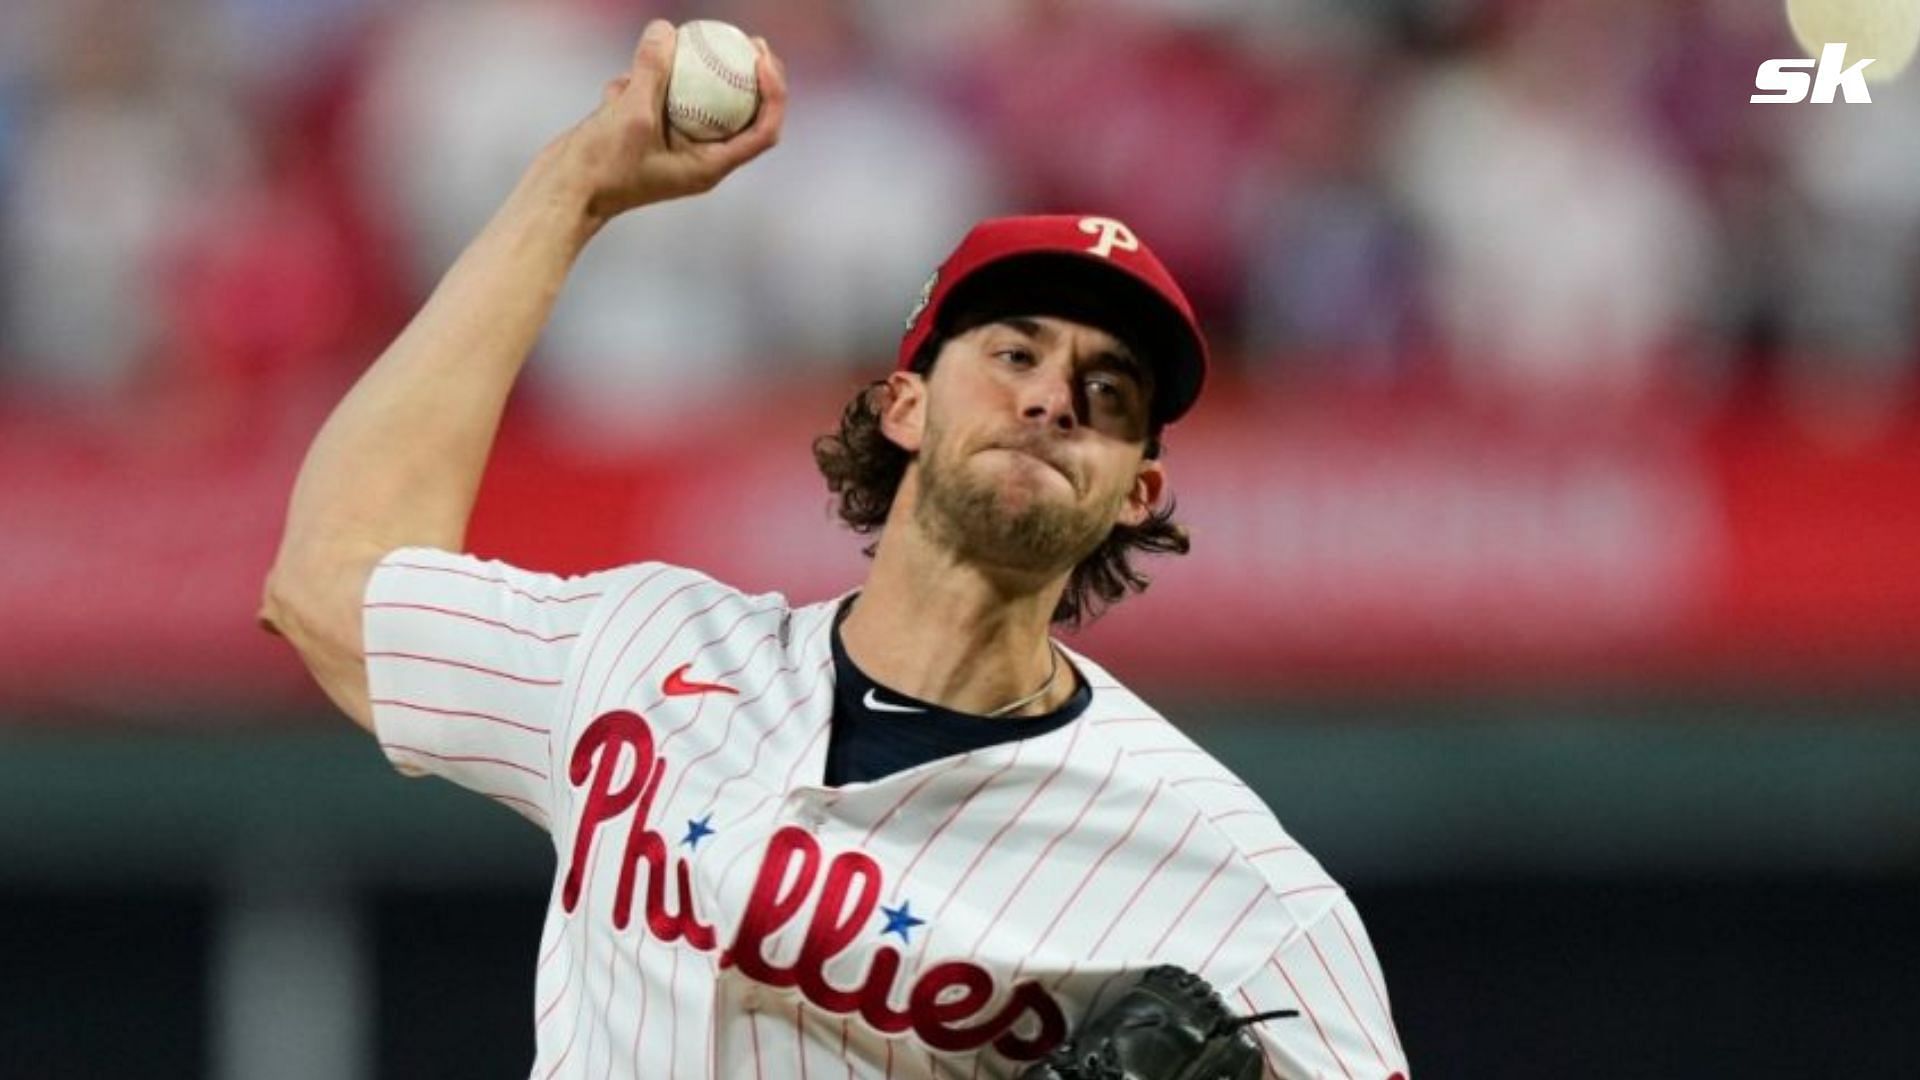  Philadelphia Phillies All-Star Aaron Nola spoke candidly about the club being heavy underdogs in the postseason